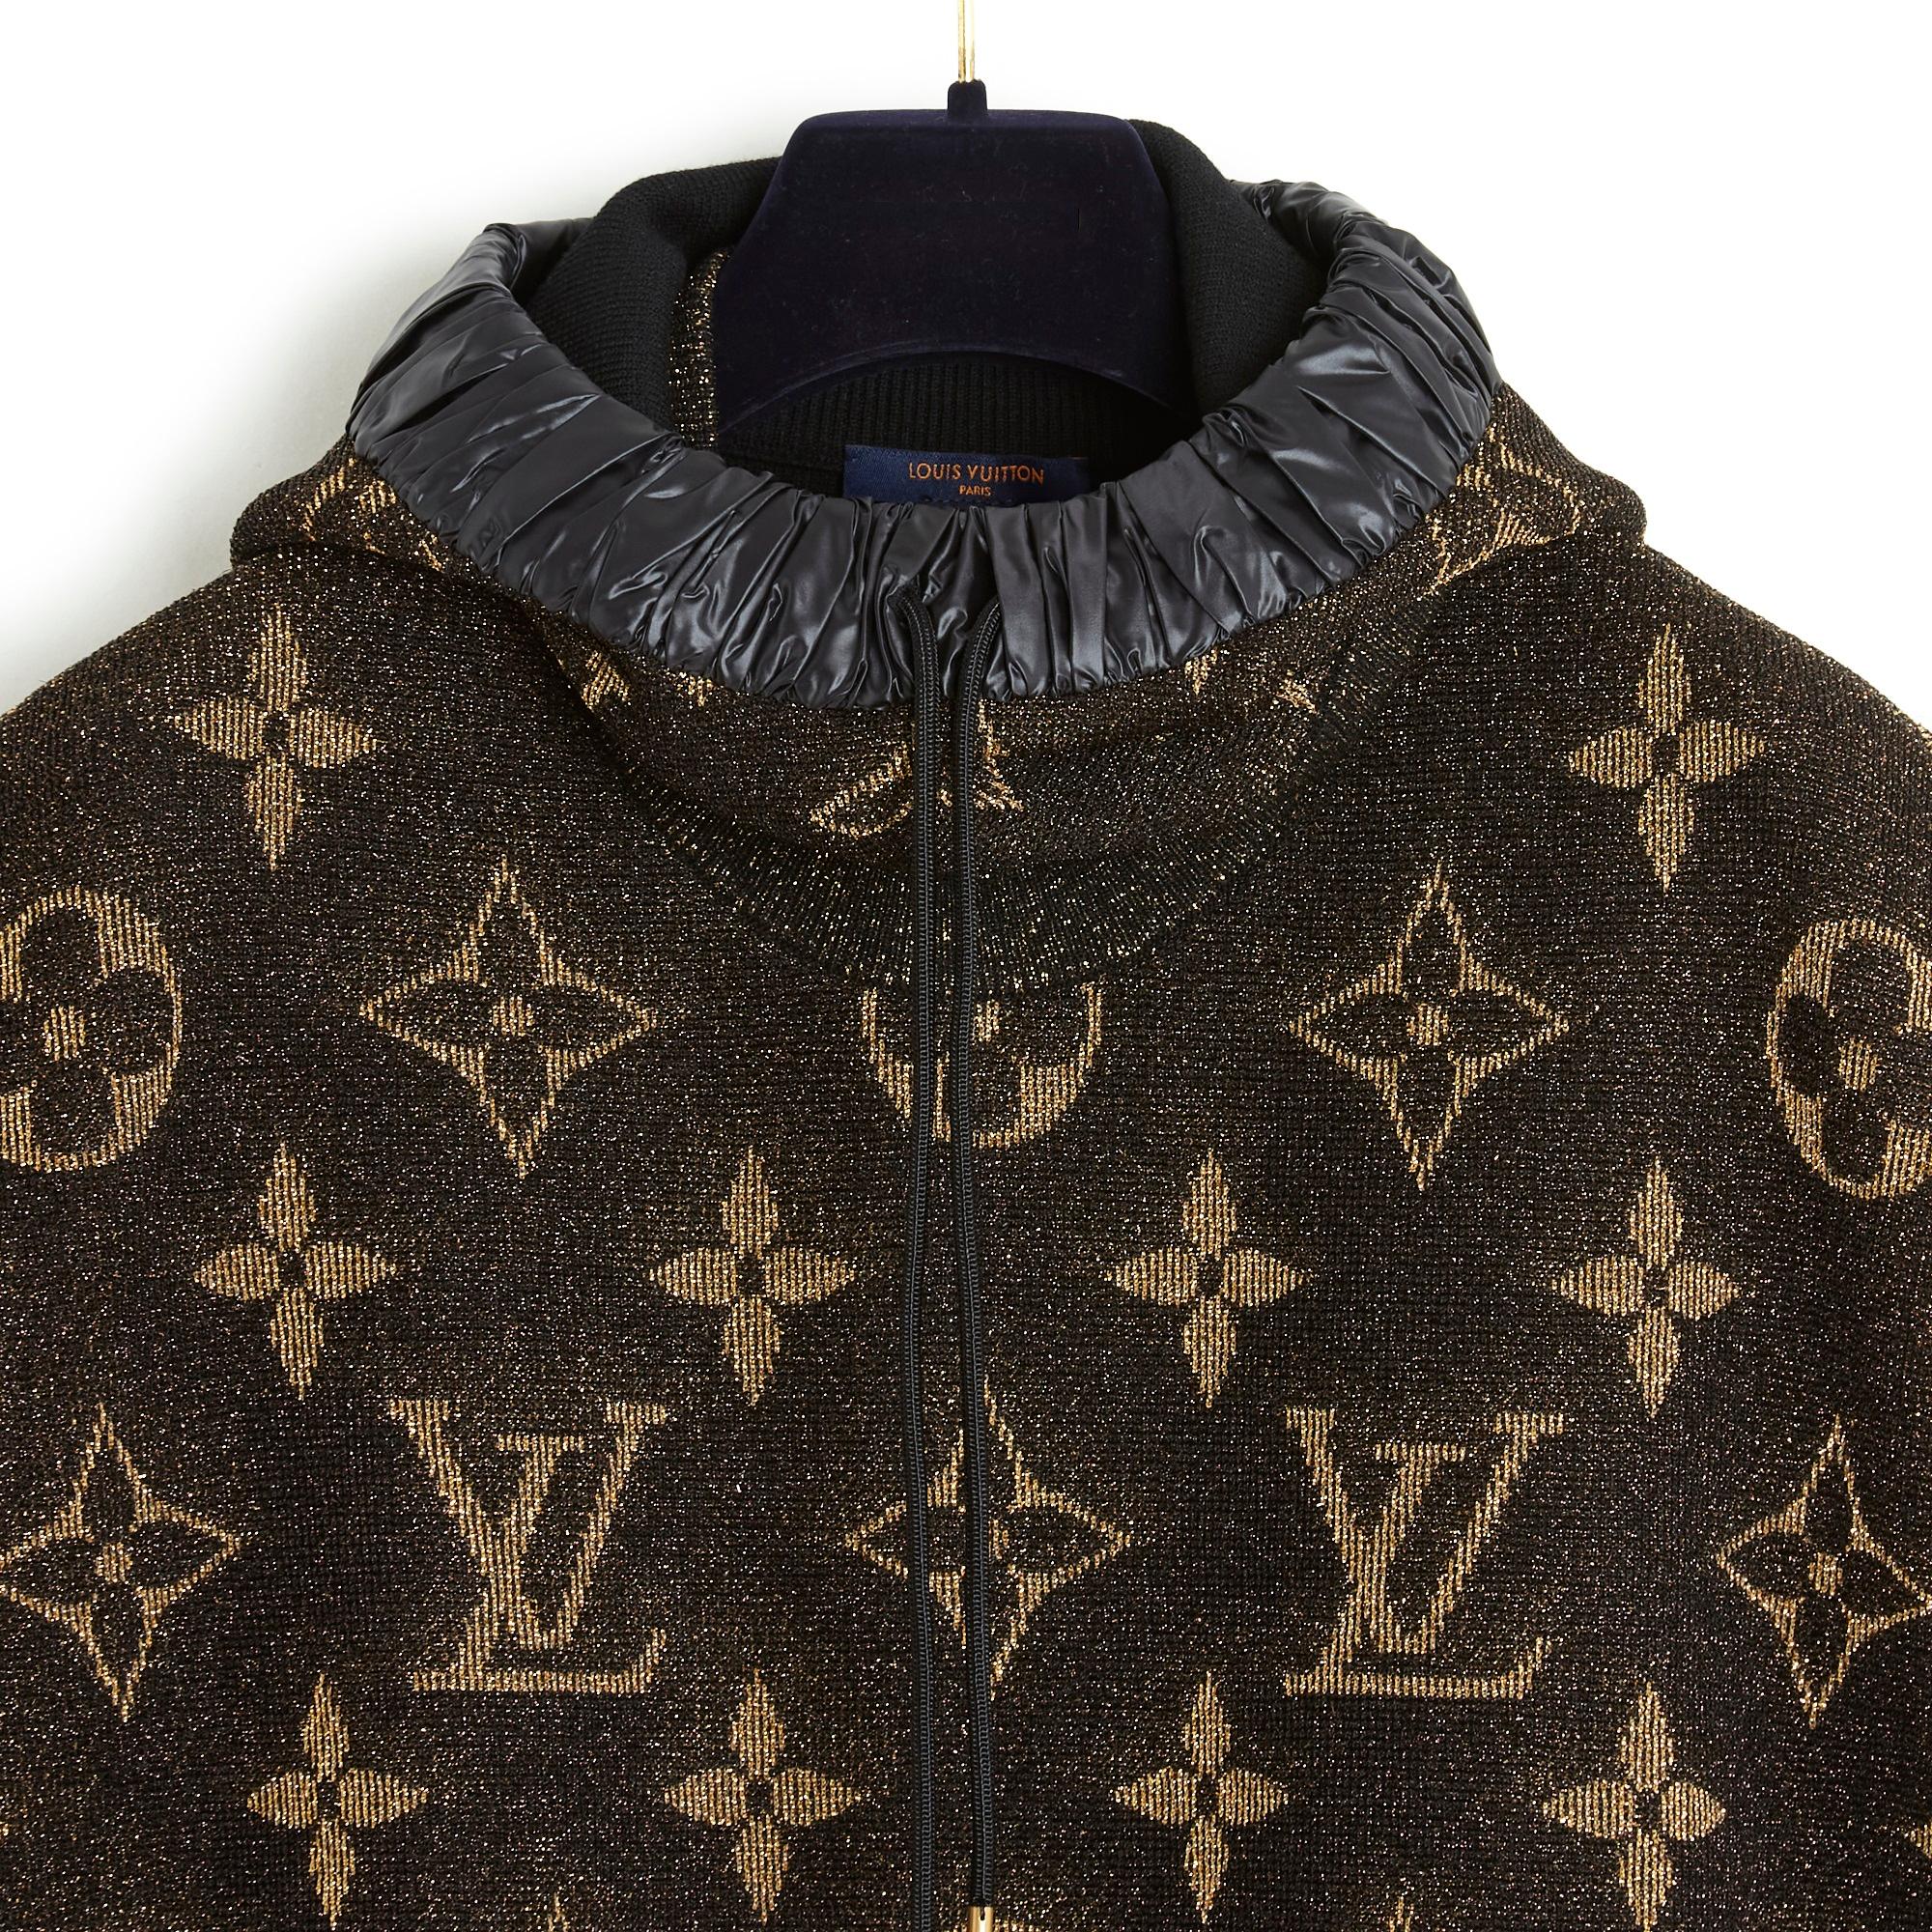 Louis Vuitton top, oversized volume sweatshirt style, in wool blend jacquard knit, monogram pattern in black, bronze and gold tones, sleeveless, round neck with removable hood lined with black technical fabric with tightening tie, held in place by 3